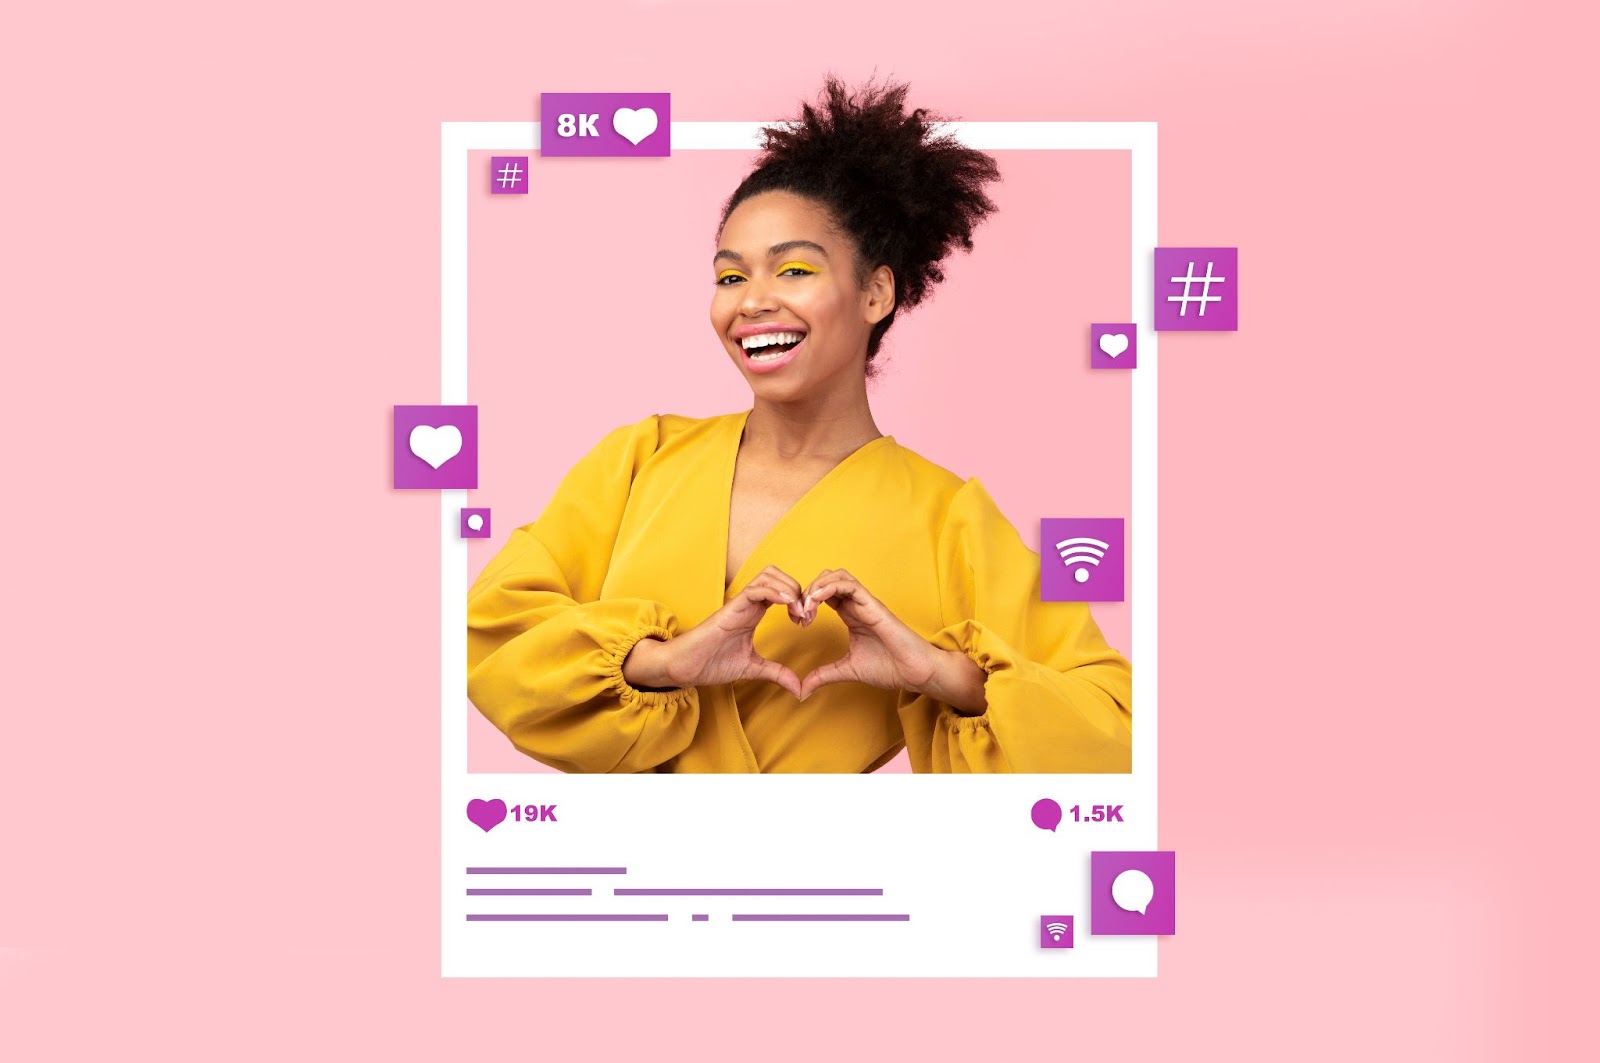 How to find influencers: smiling woman with a lot of hearts and comments around her